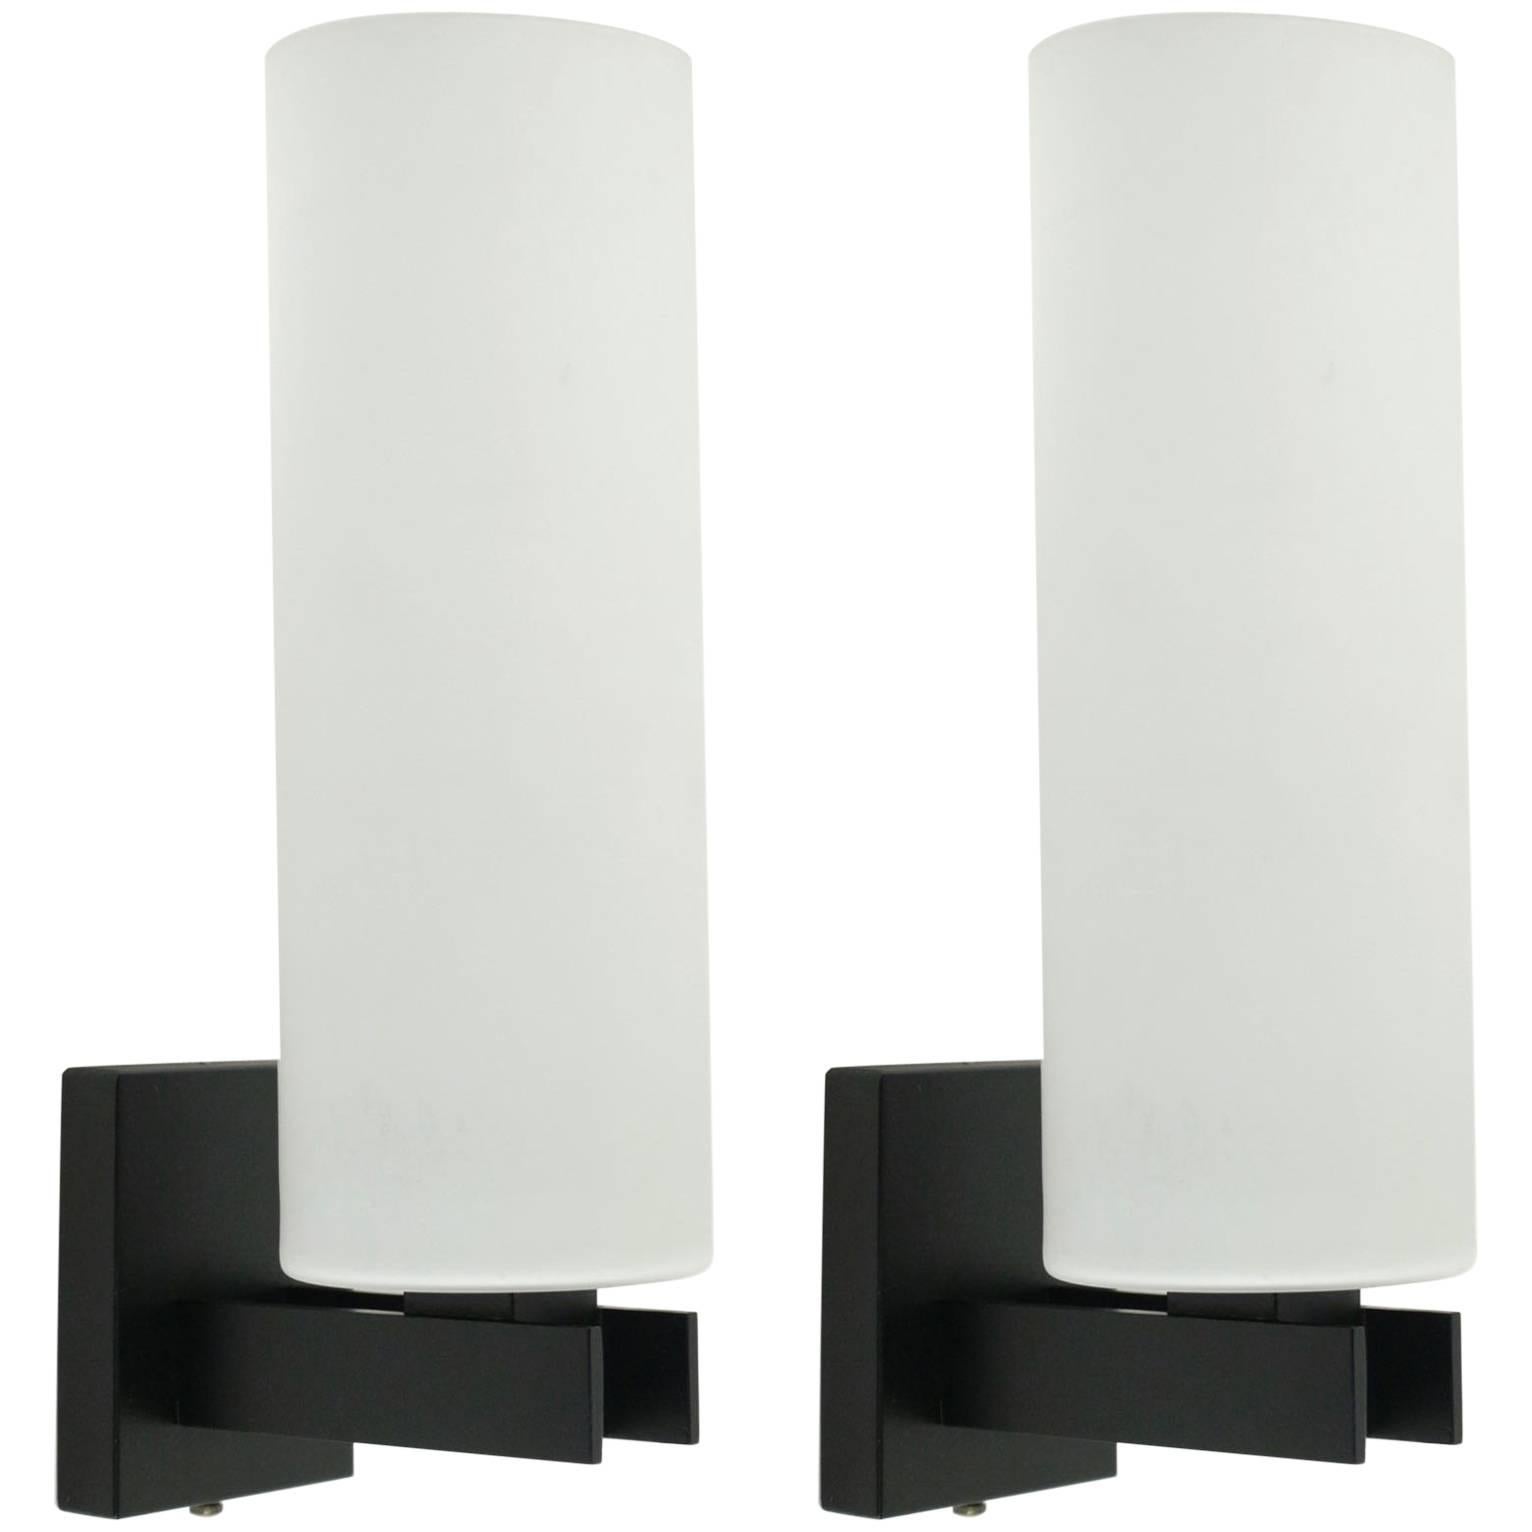 1960s Pair of Blackened Steel Sconces with White Satin Glass Shades